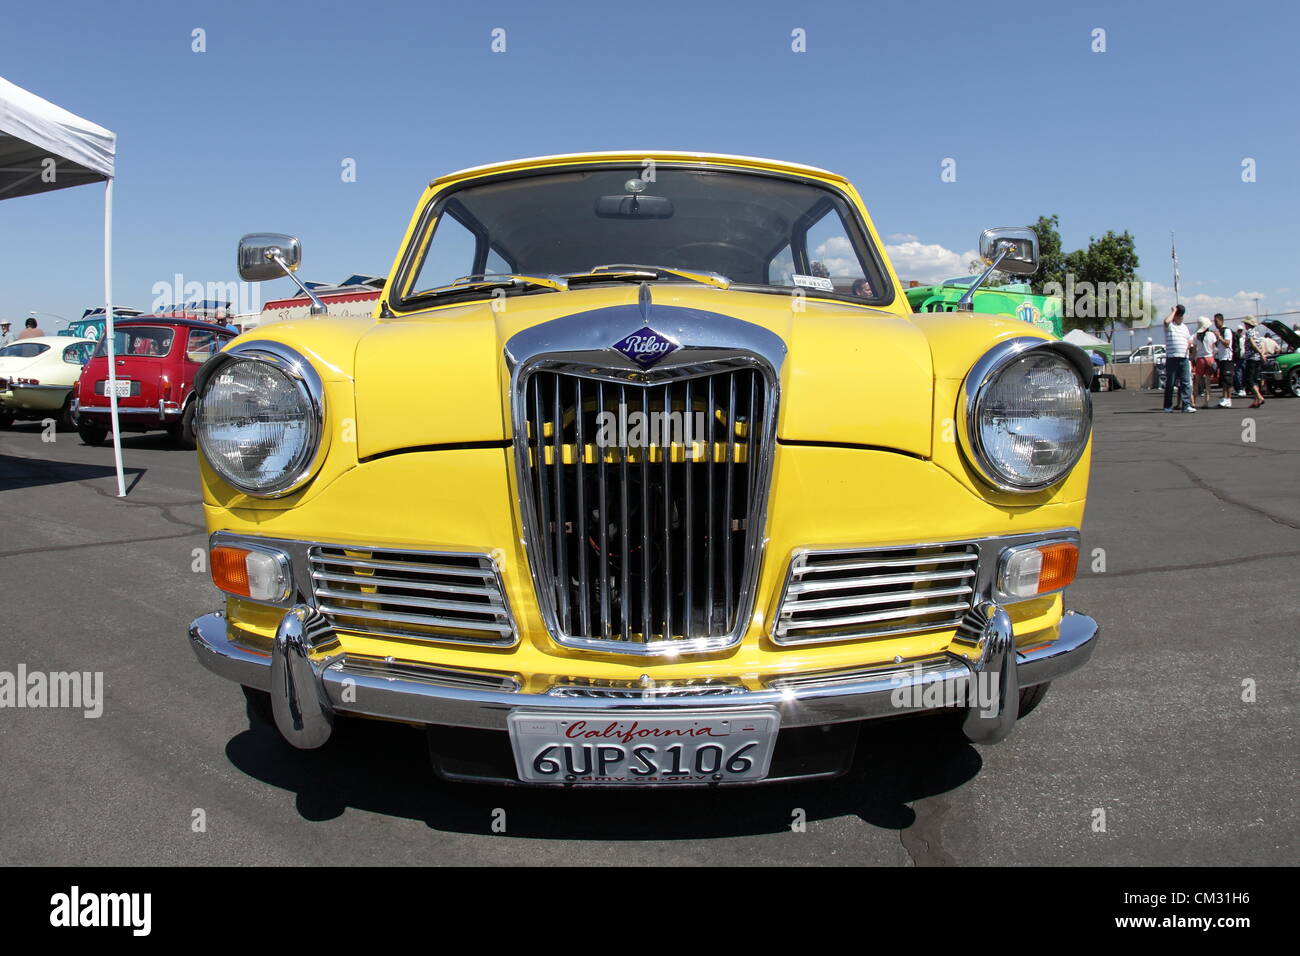 EL MONTE, CALIFORNIA, USA - SEPTEMBER 23, 2012 - The Riley Elf from the 1960's was a luxurious mini on display at the El Monte Airshow on September 23, 2012. Stock Photo